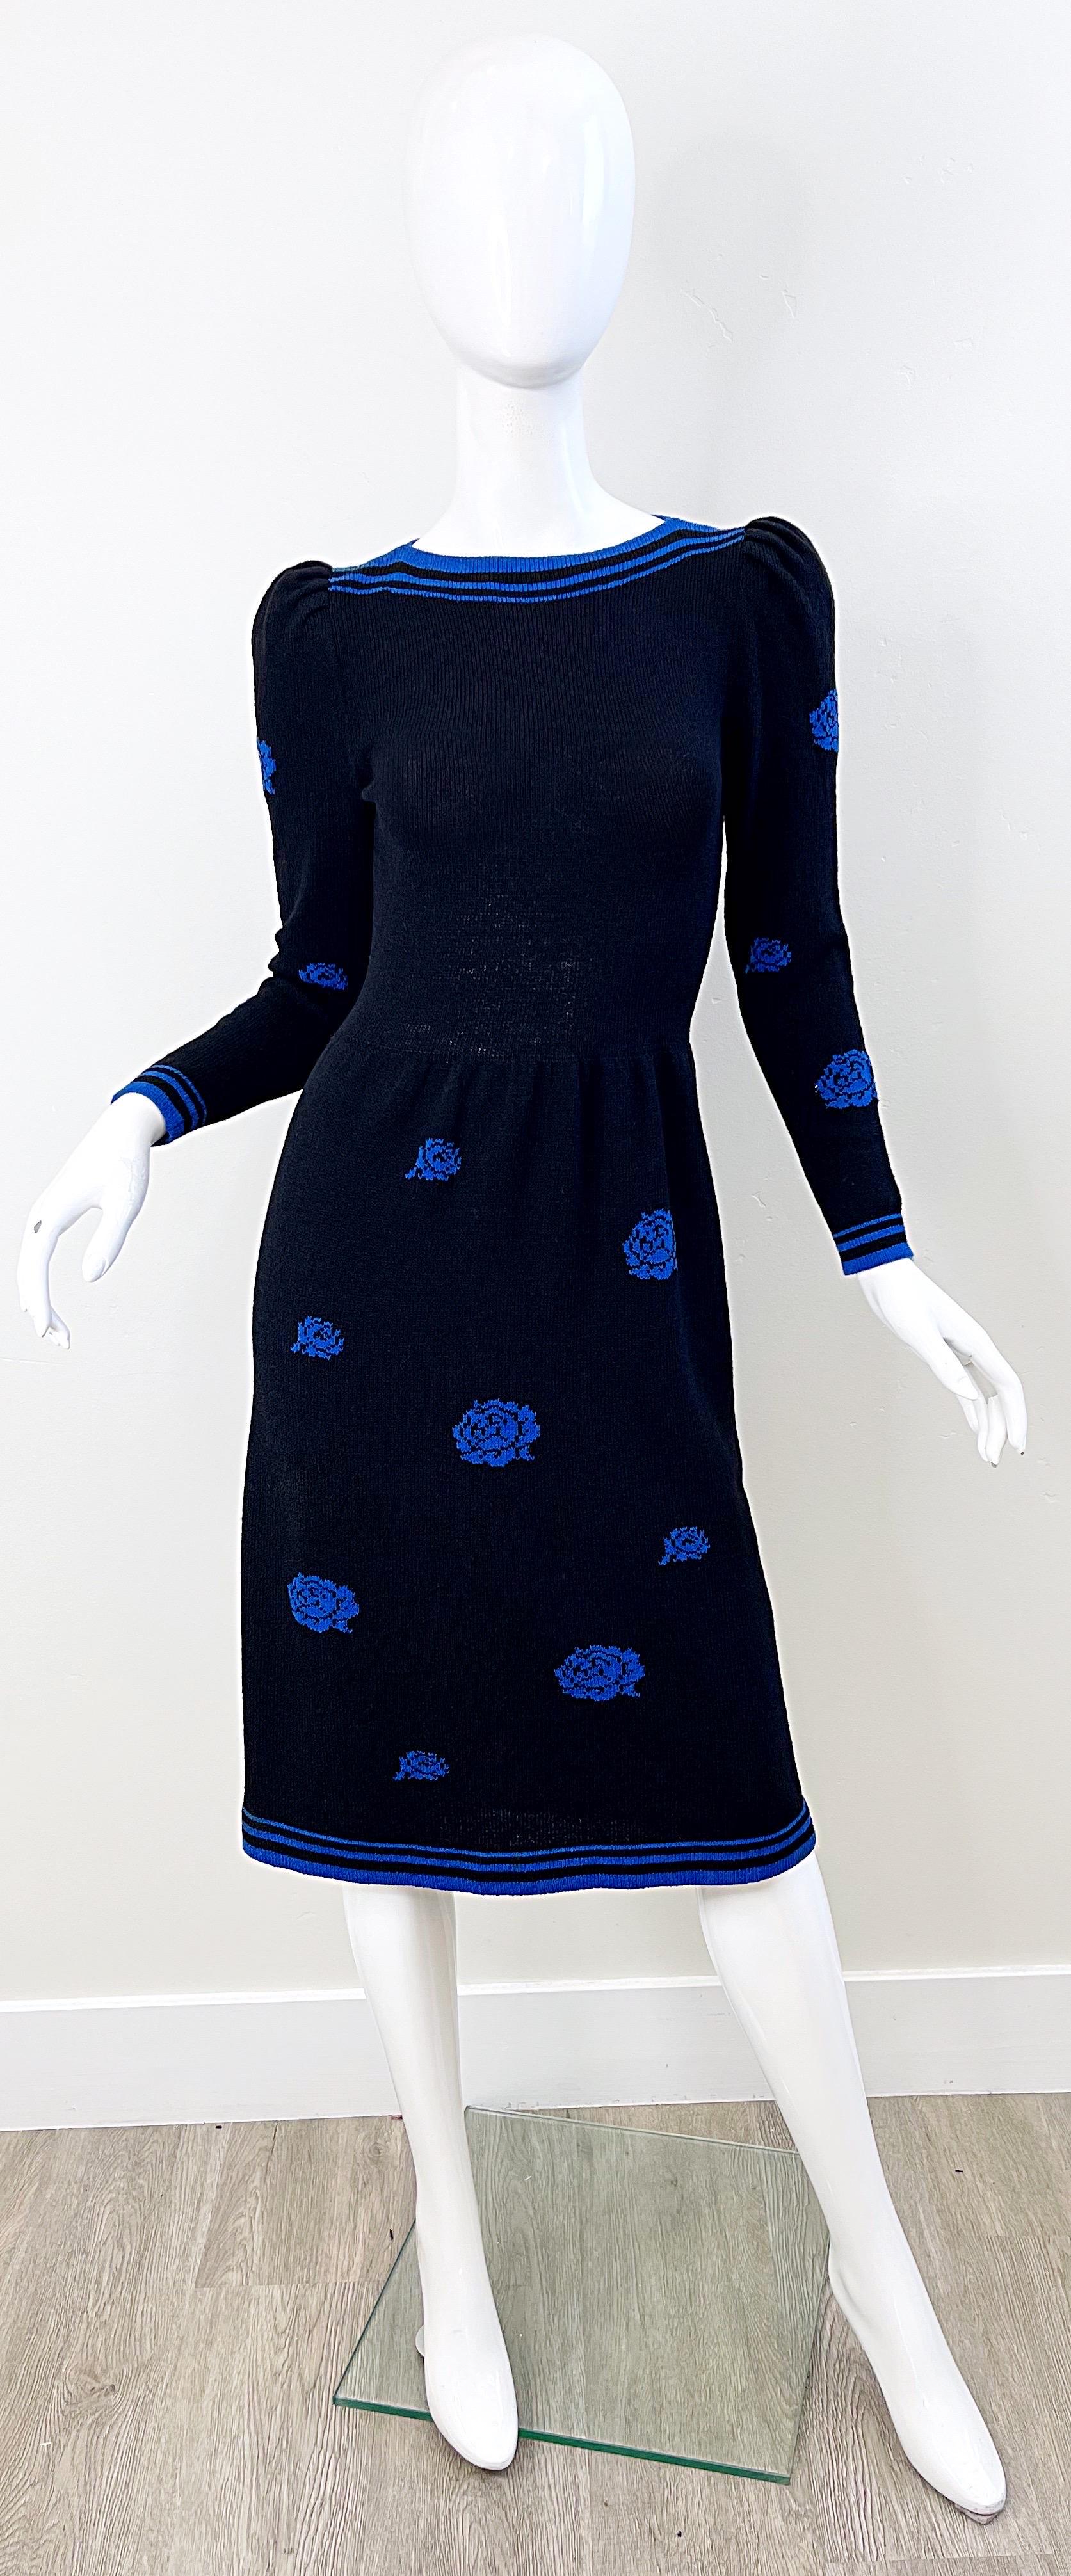 70s Adolfo For Saks 5th Avenue Black Blue Flower Print Vintage 1970s Knit Dress In Excellent Condition For Sale In San Diego, CA